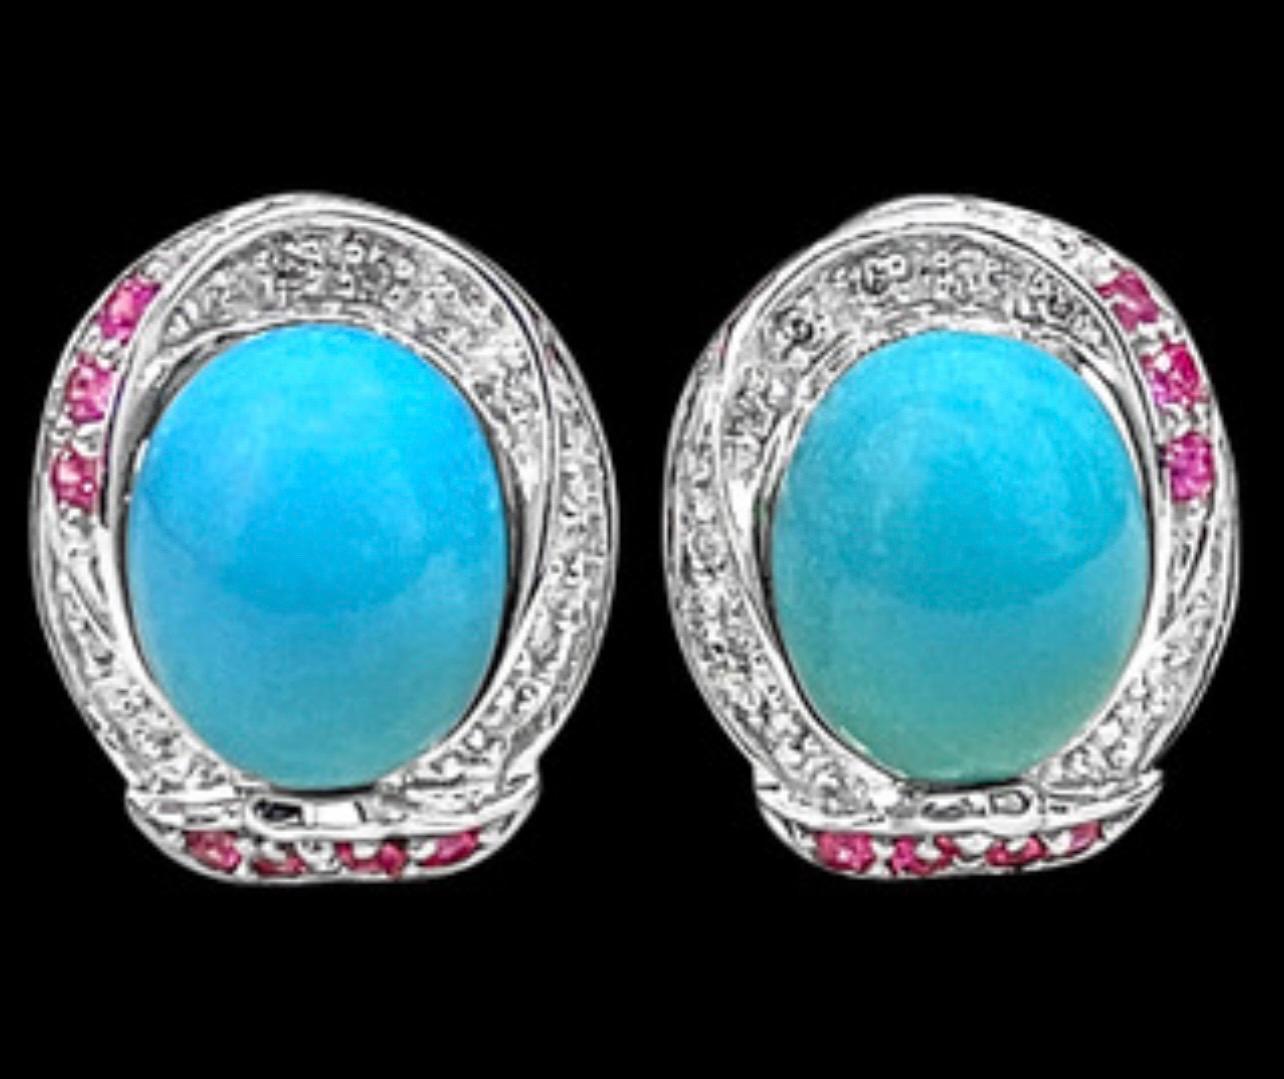 Approximately 7 Carat of Turquoise Stud  Earring 14 Karat White  gold.
Each turquoise about 3 to 3.5 carat each.
Very desirable color and quality.
perfect pair made in 14 Karat White gold
Gold 7.8 Grams including stones.
Brilliant cut round Diamonds